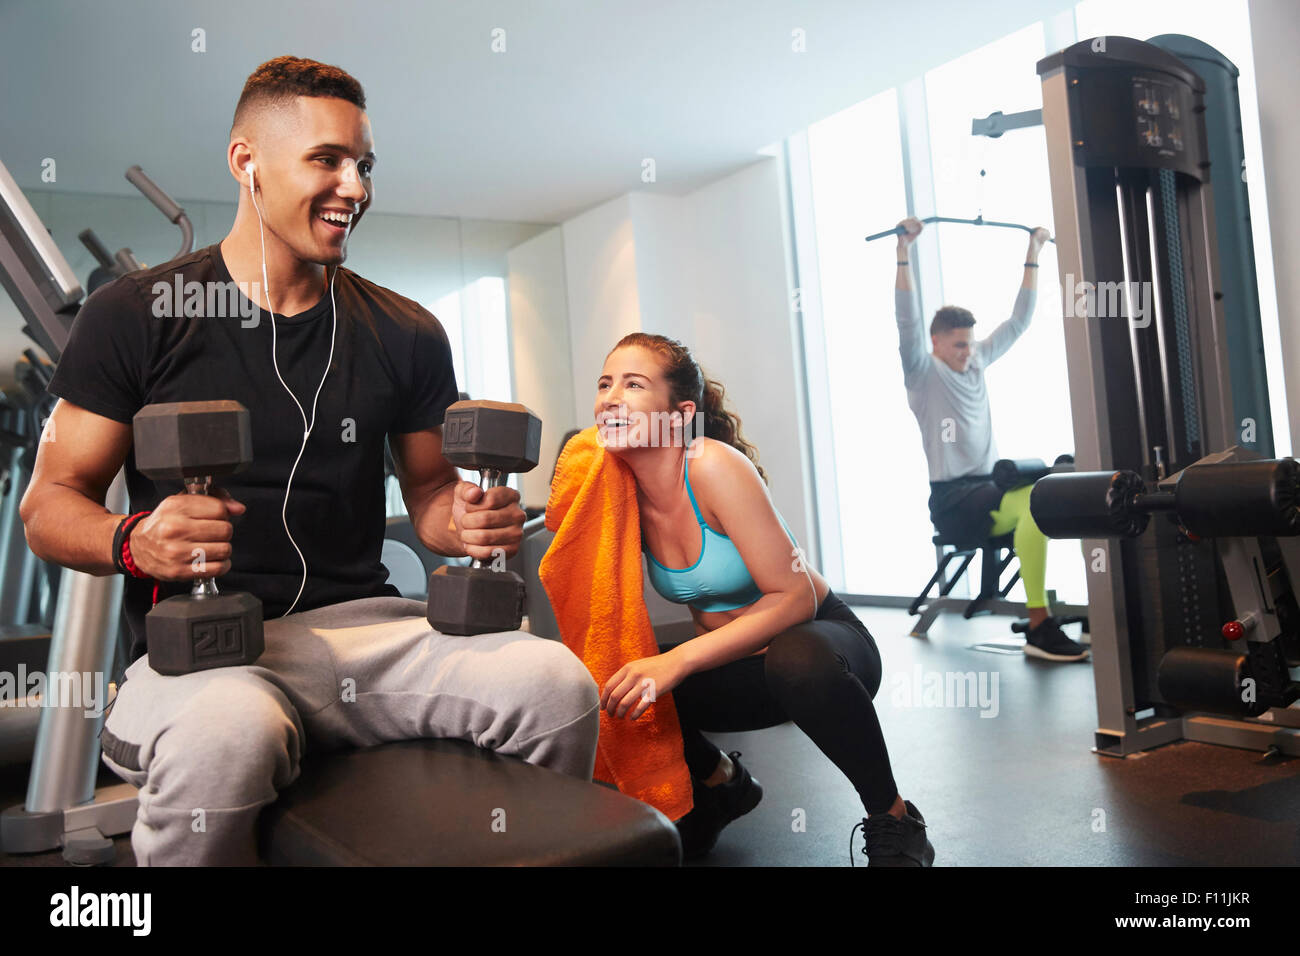 Friends working out in gym Stock Photo